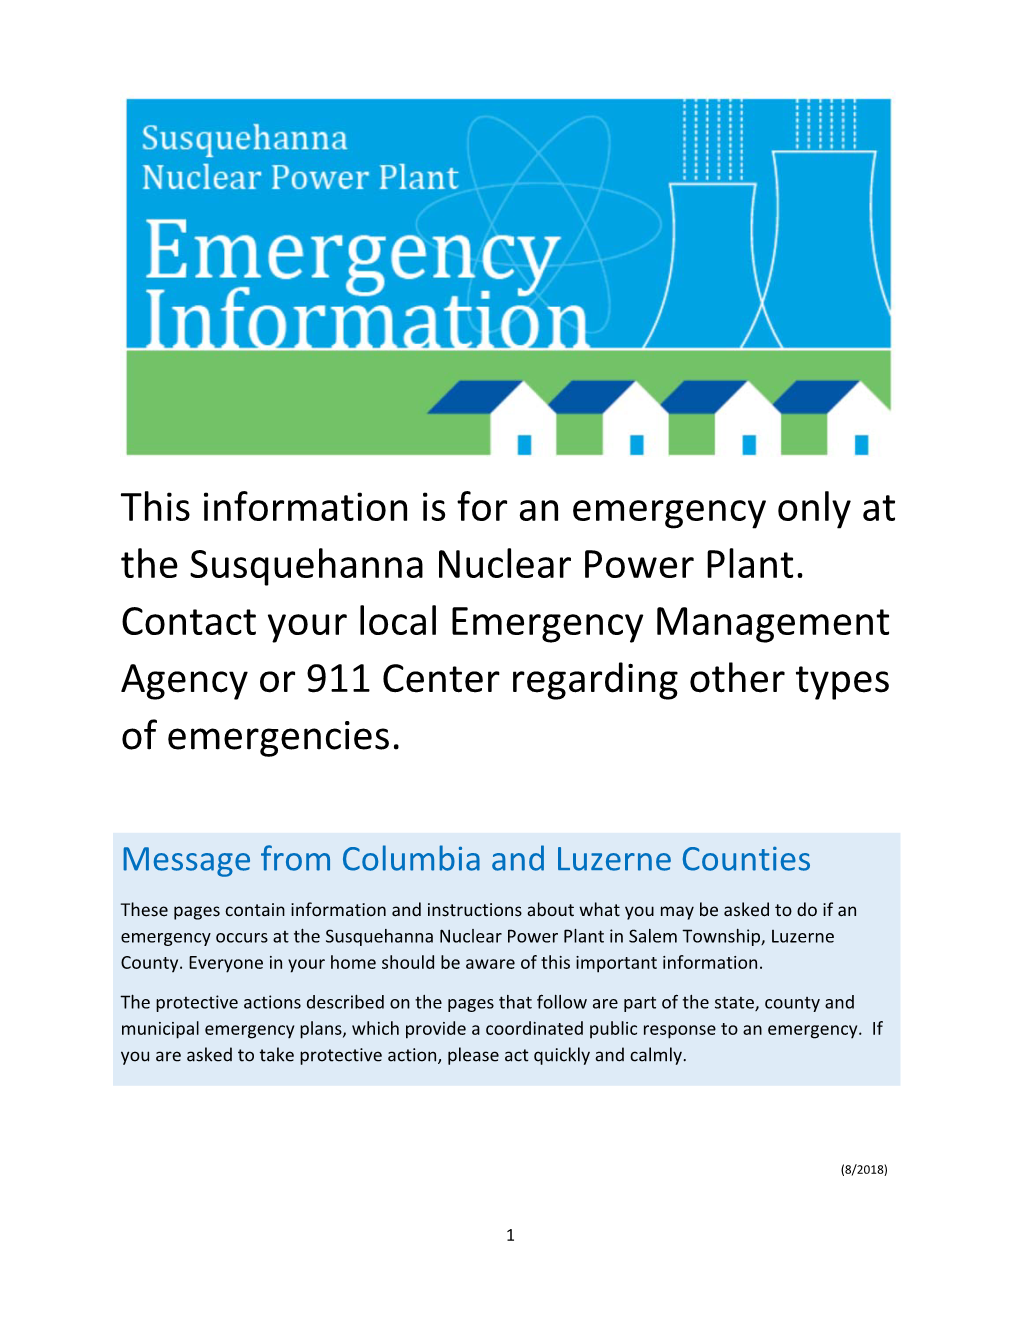 This Information Is for an Emergency Only at the Susquehanna Nuclear Power Plant. Contact Your Local Emergency Management Agency